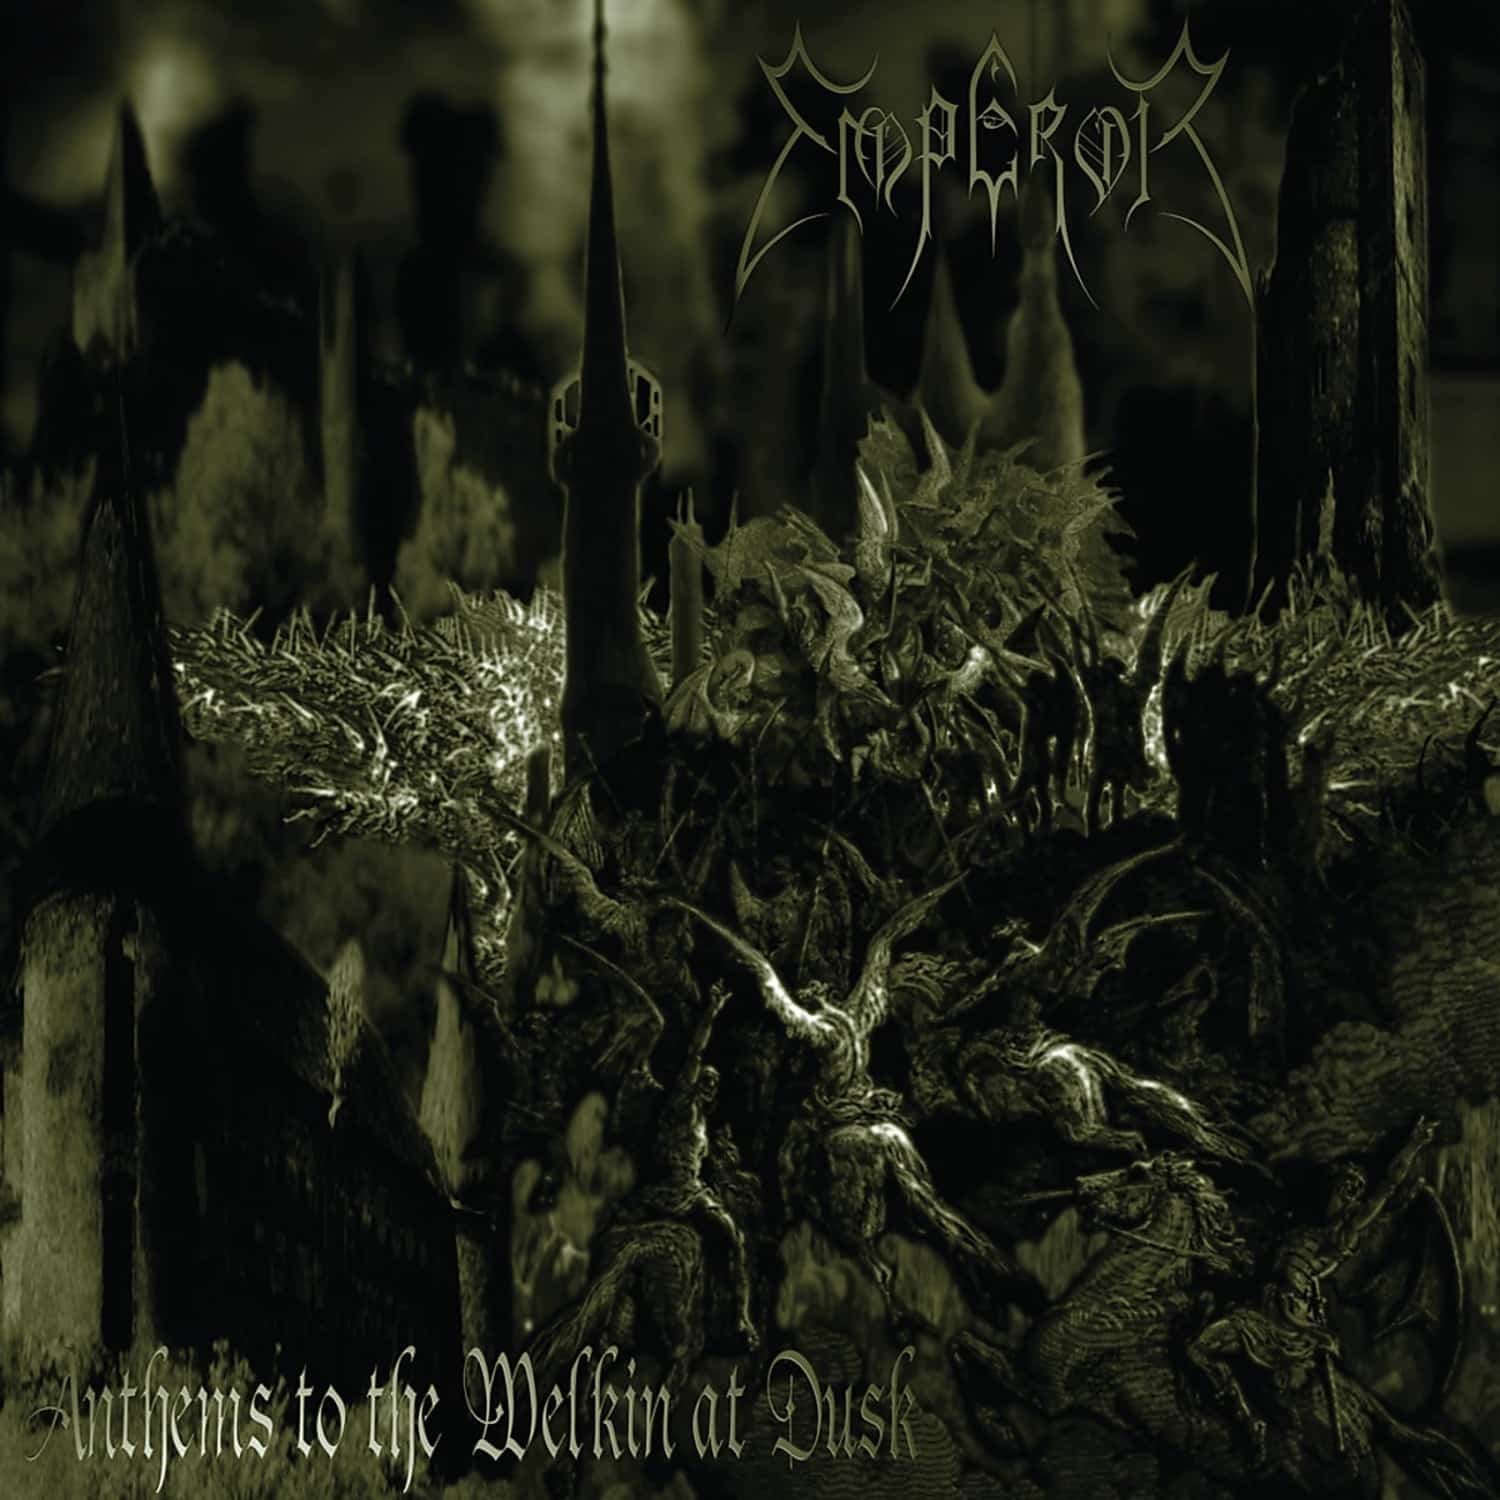 Emperor - ANTHEMS TO THE WELKIN AT DUSK 